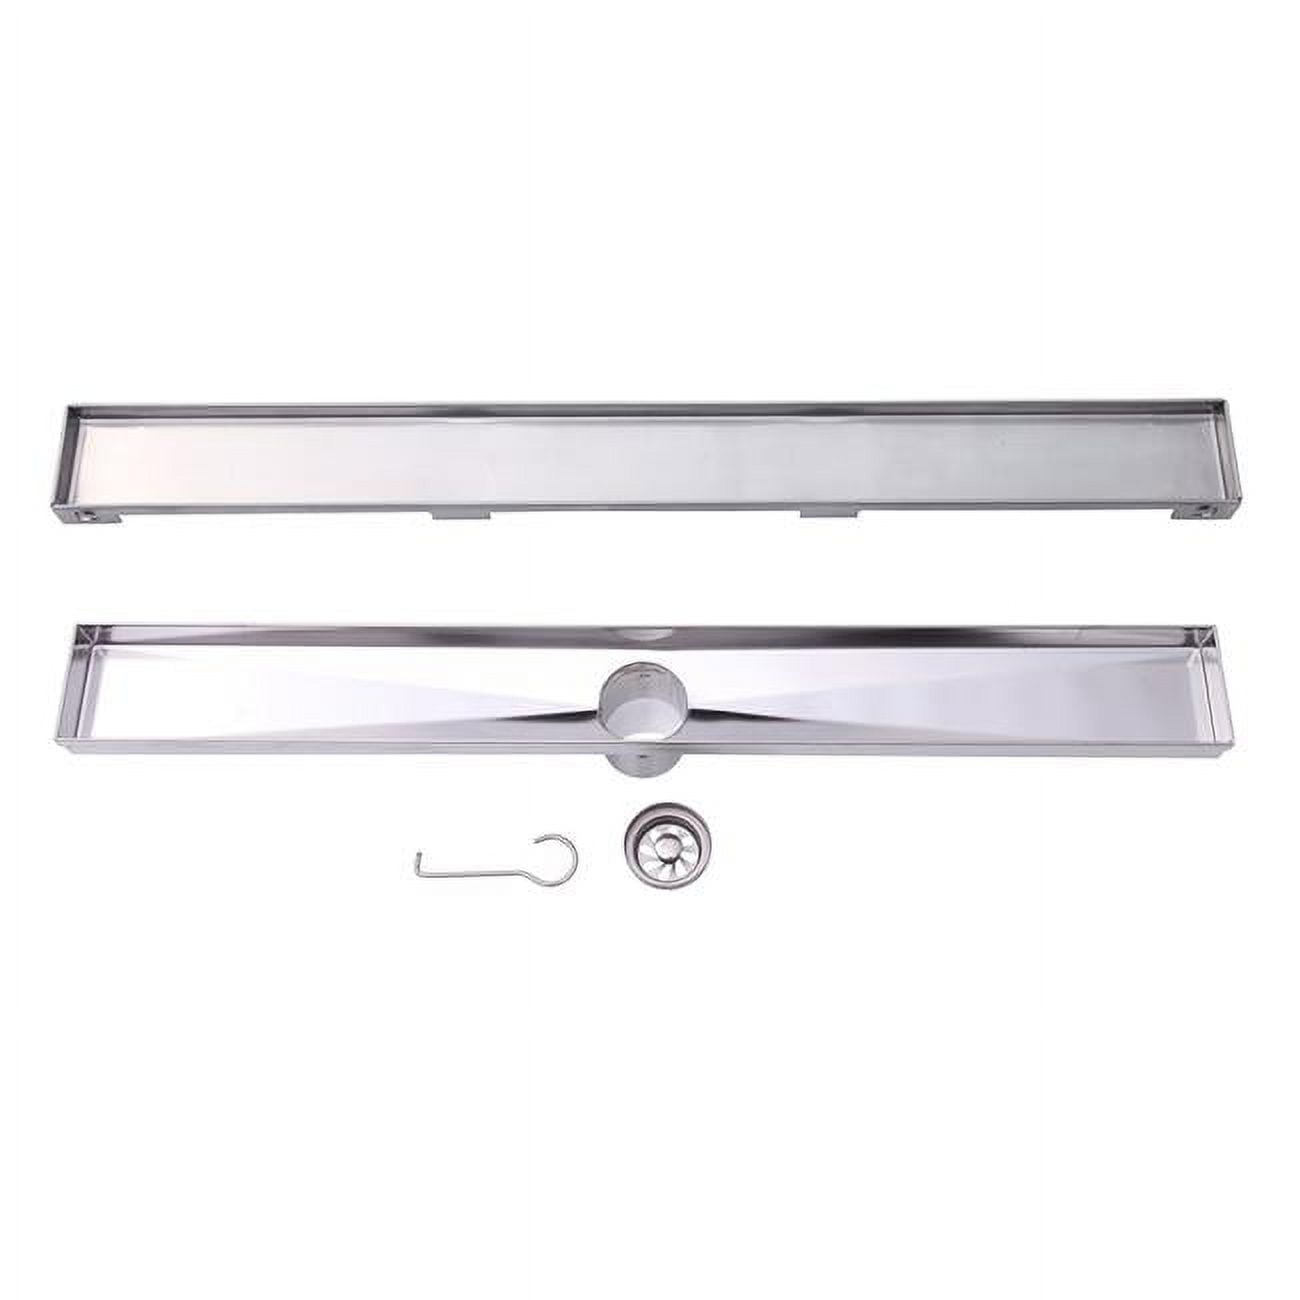 Picture of Boann BNLD36C16 Modern Hole Design Stainless Steel Linear Drain - 36 in.